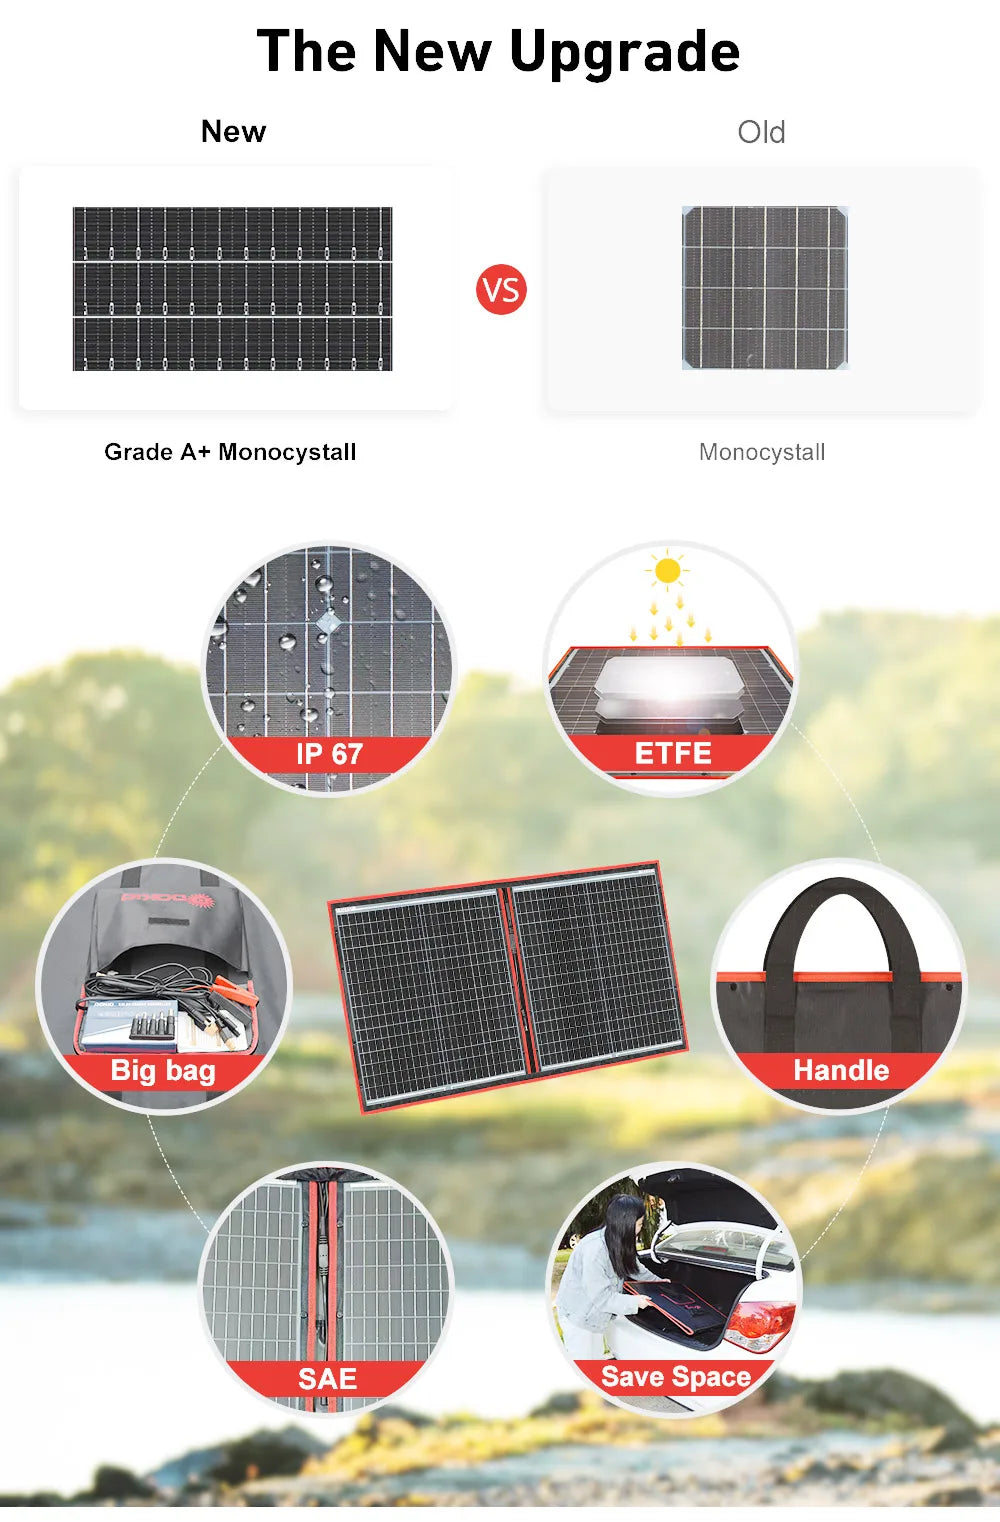 DOKIO 18V 100W 300W Portable Ffolding Solar Panel, Waterproof solar panel with compact design and ergonomic handle for easy transport.